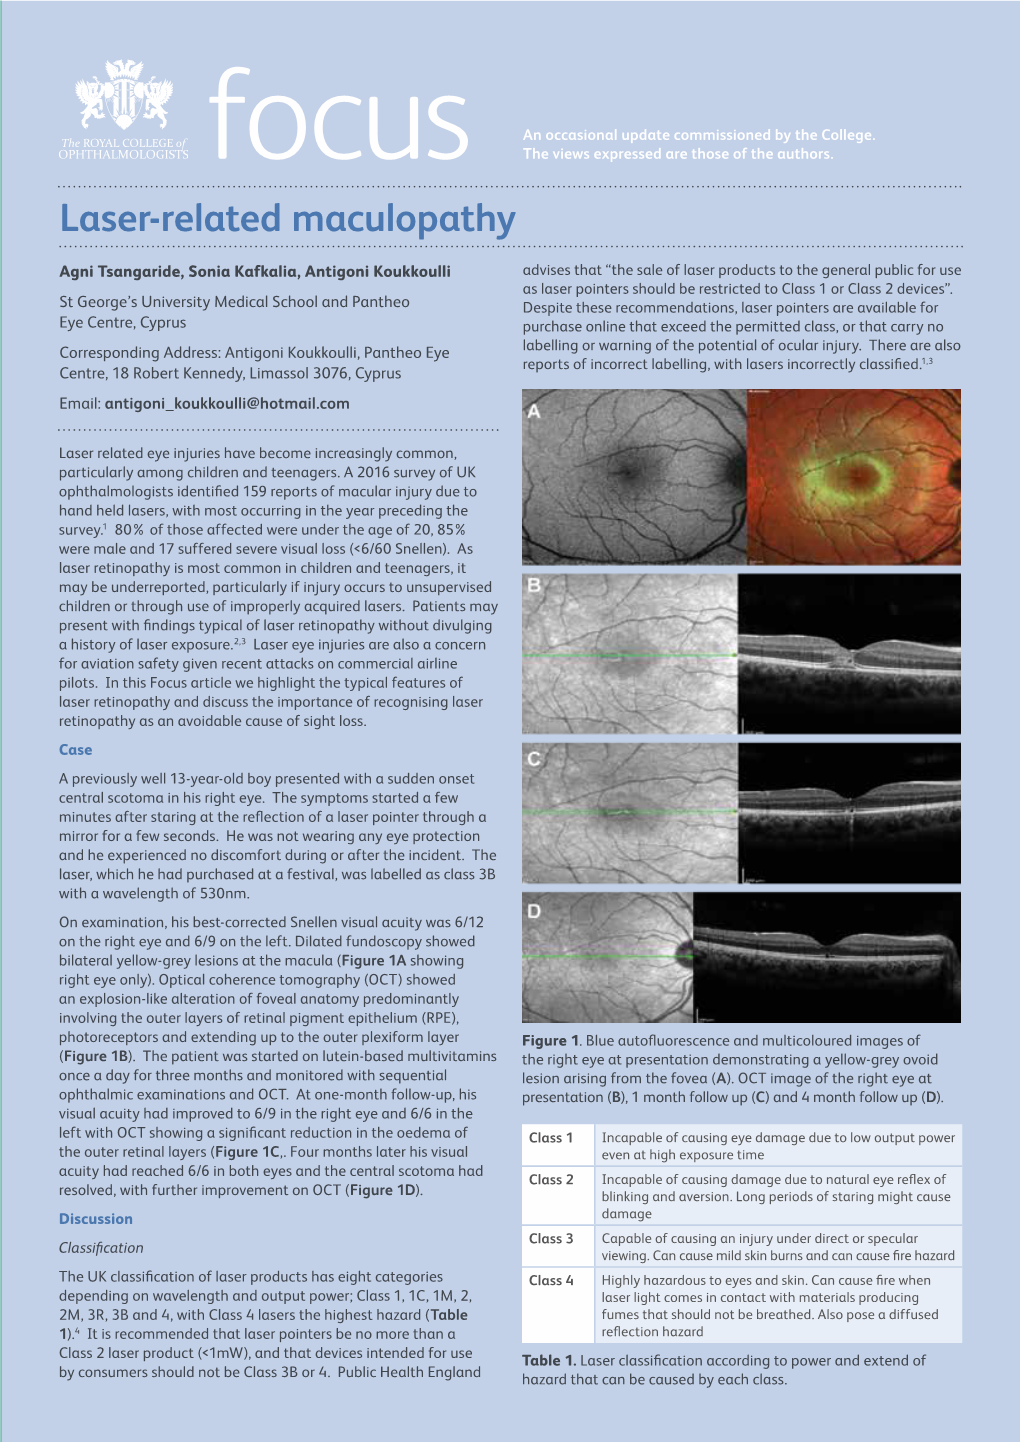 Focus October 2020 – Laser-Related Maculopathy